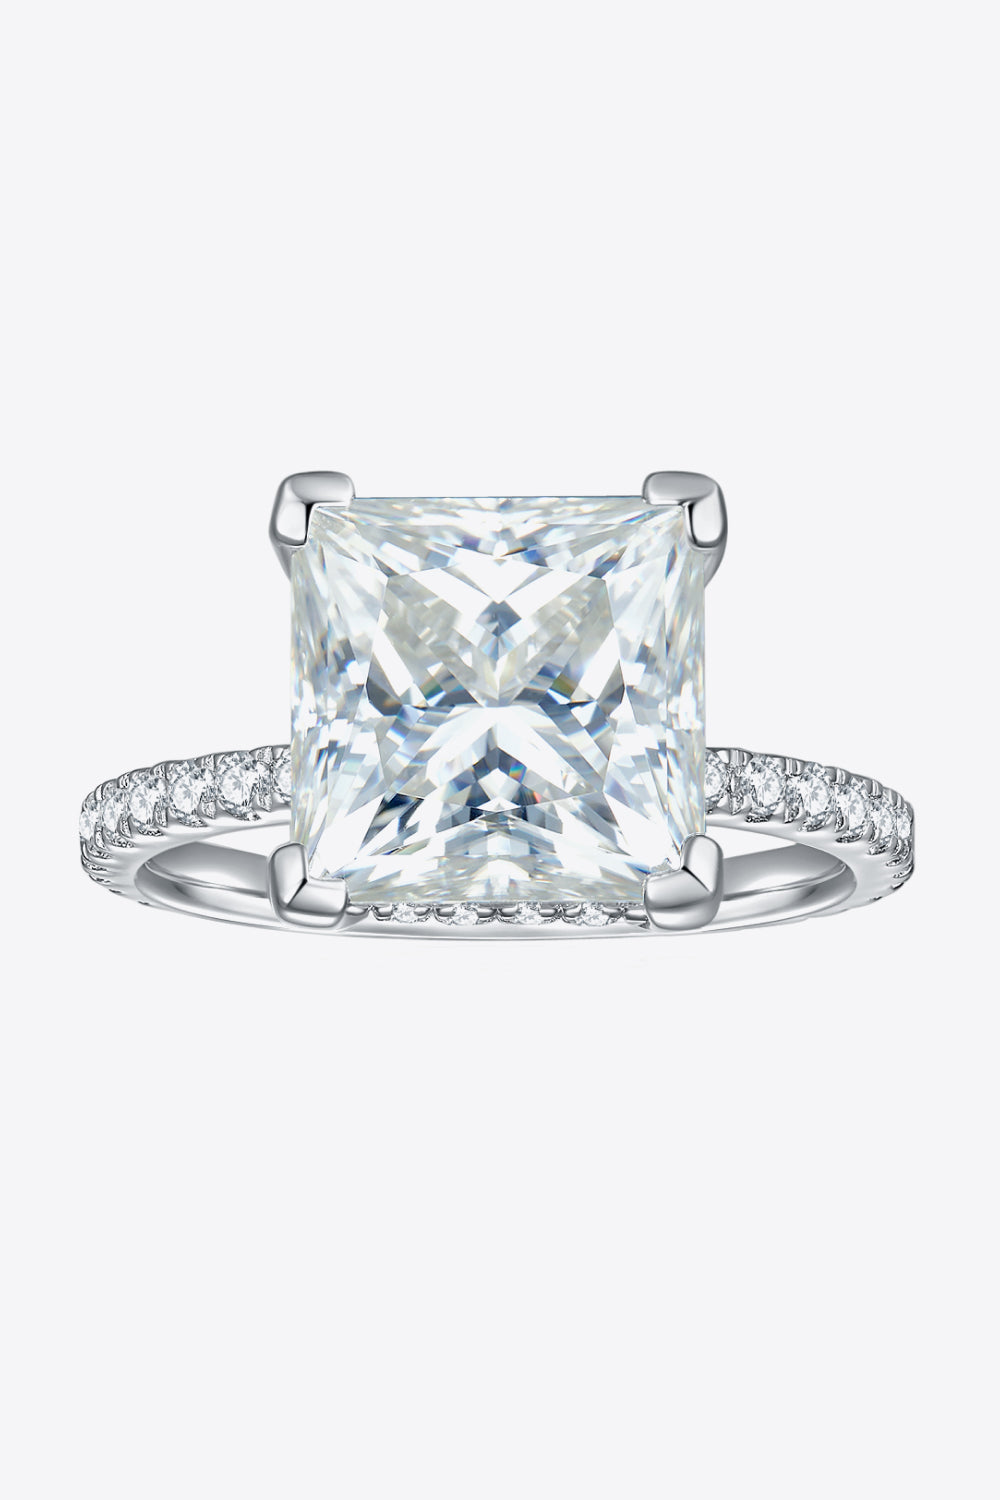 5.52 Carat Radiant-Cut Moissanite Ring (Platinum Over Pure Sterling Silver)